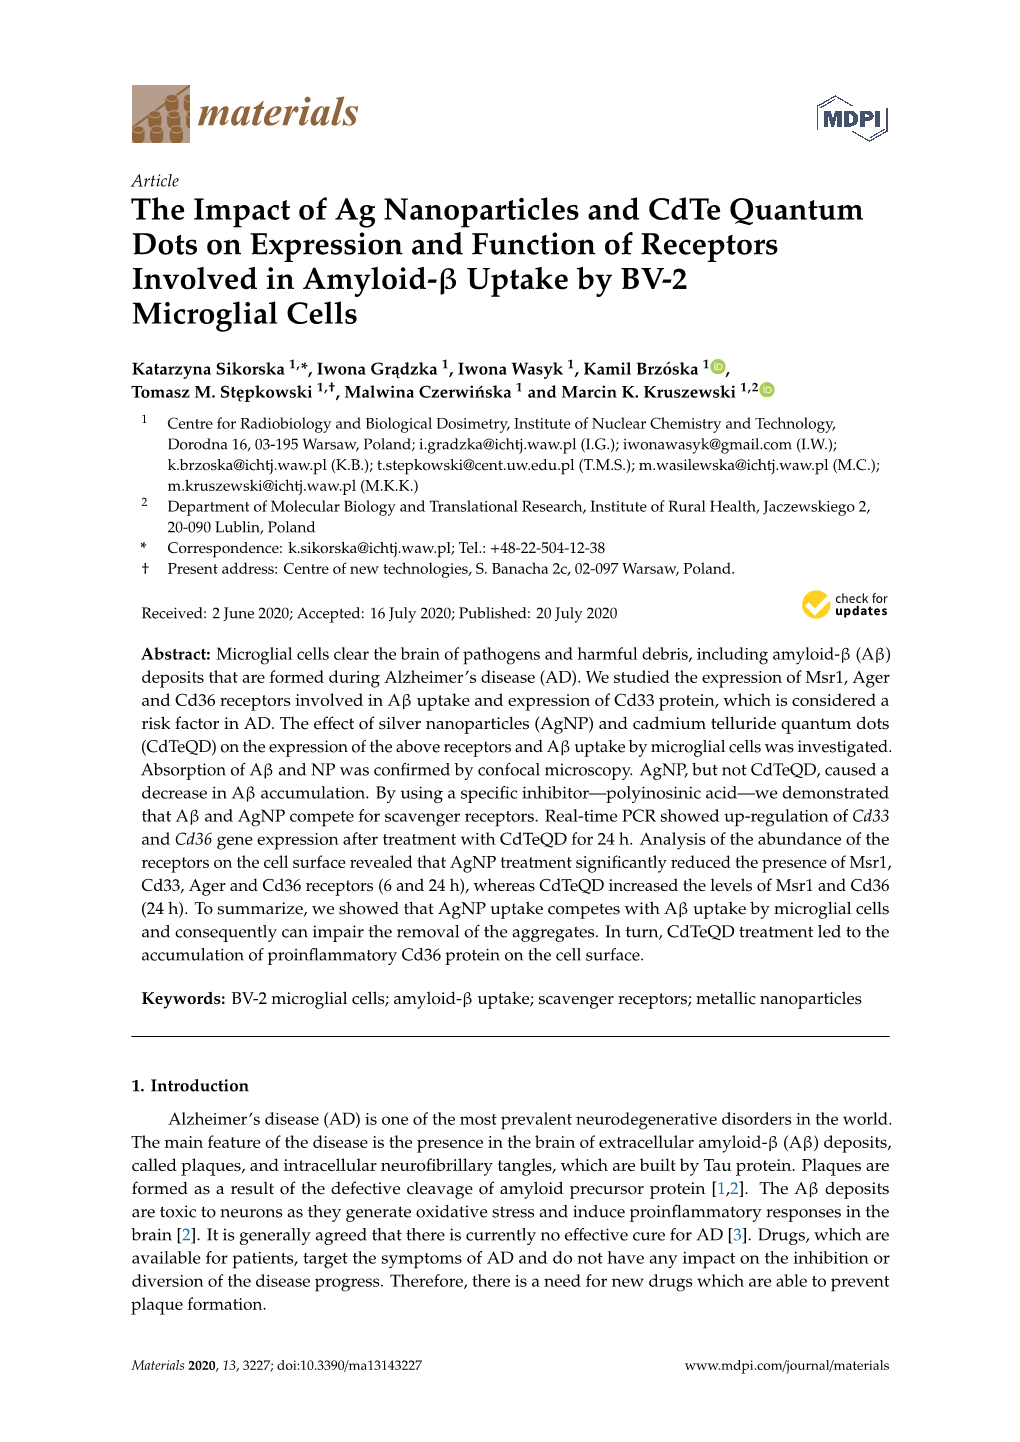 The Impact of Ag Nanoparticles and Cdte Quantum Dots on Expression and Function of Receptors Involved in Amyloid-Β Uptake by BV-2 Microglial Cells